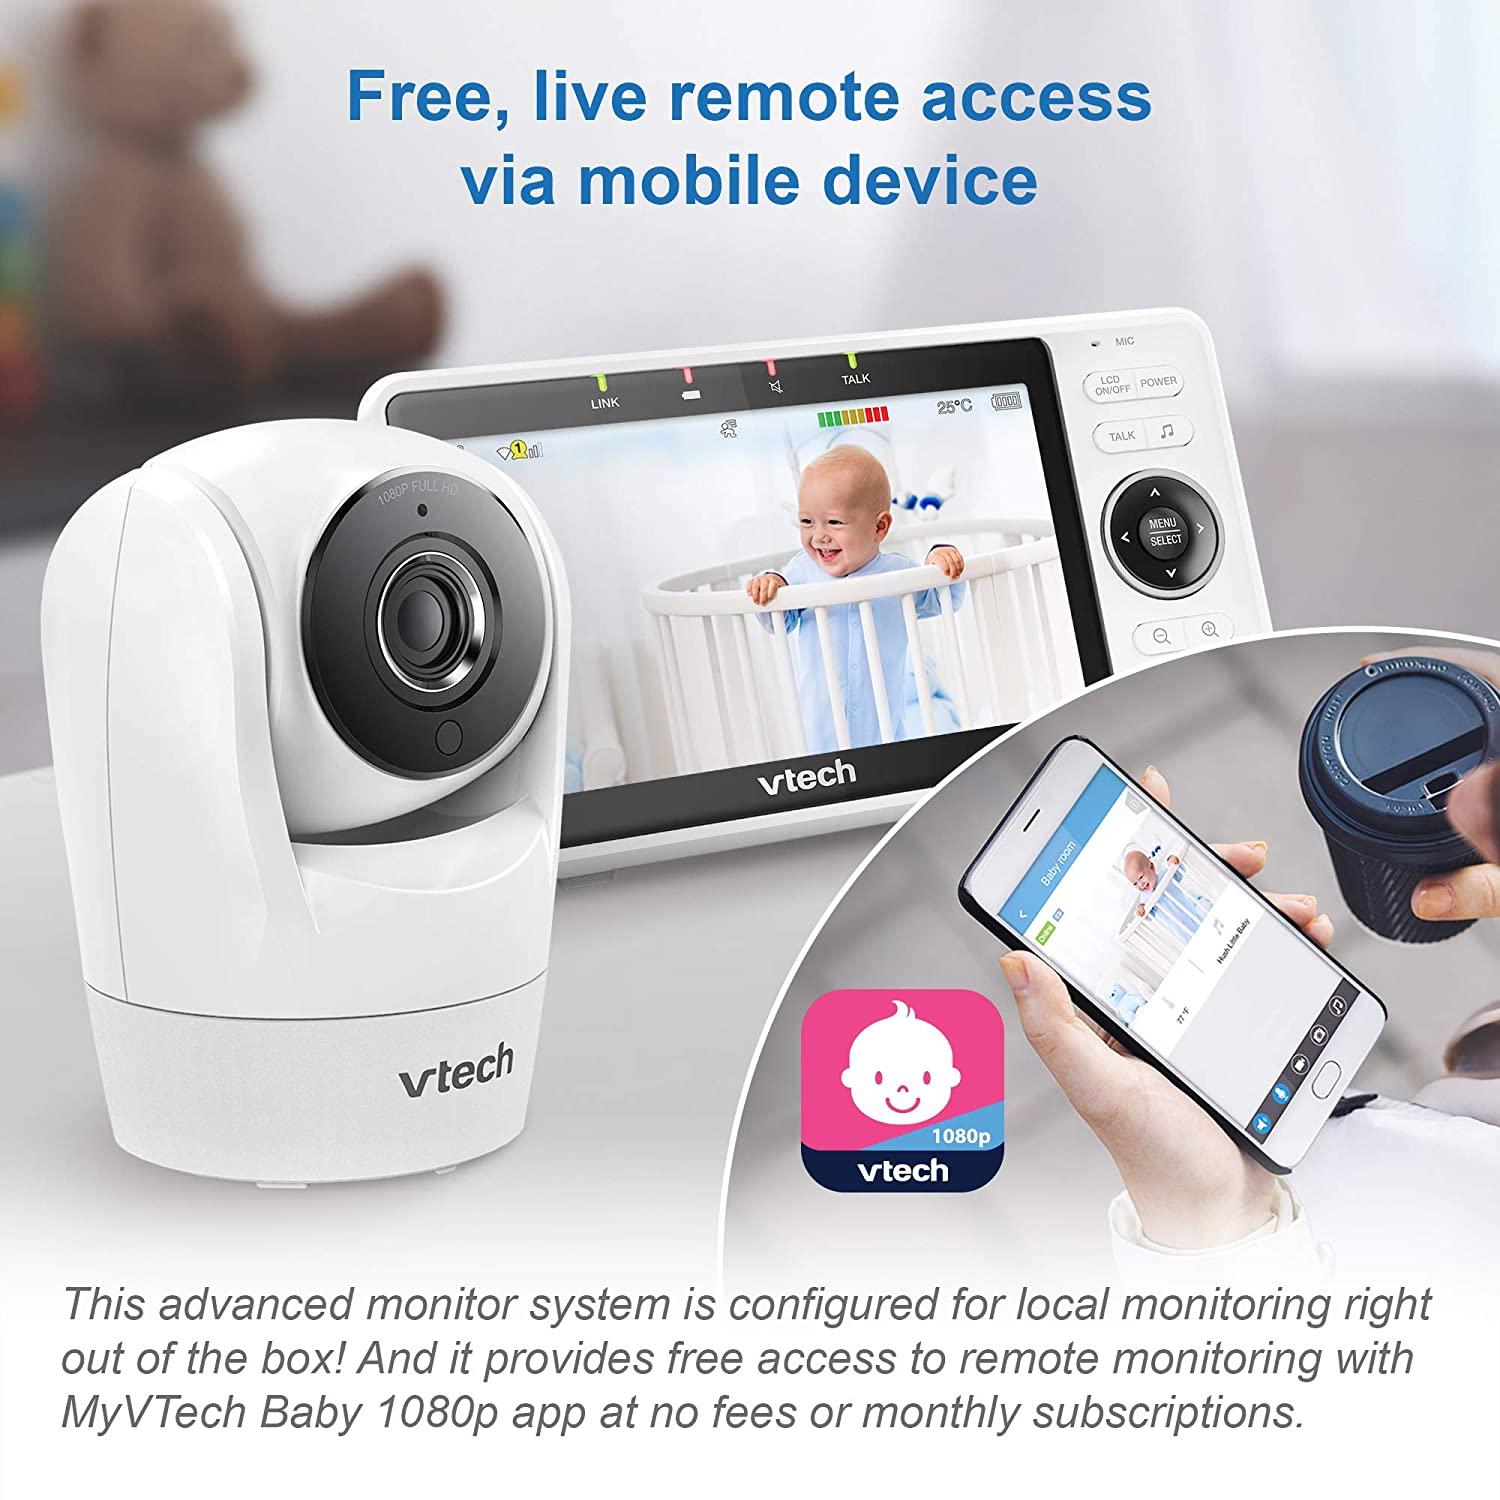 1080p Smart WiFi Remote Access 360 Degree Pan & Tilt Video Baby Monitor  with 5 High Definition 720p Display, Night Light